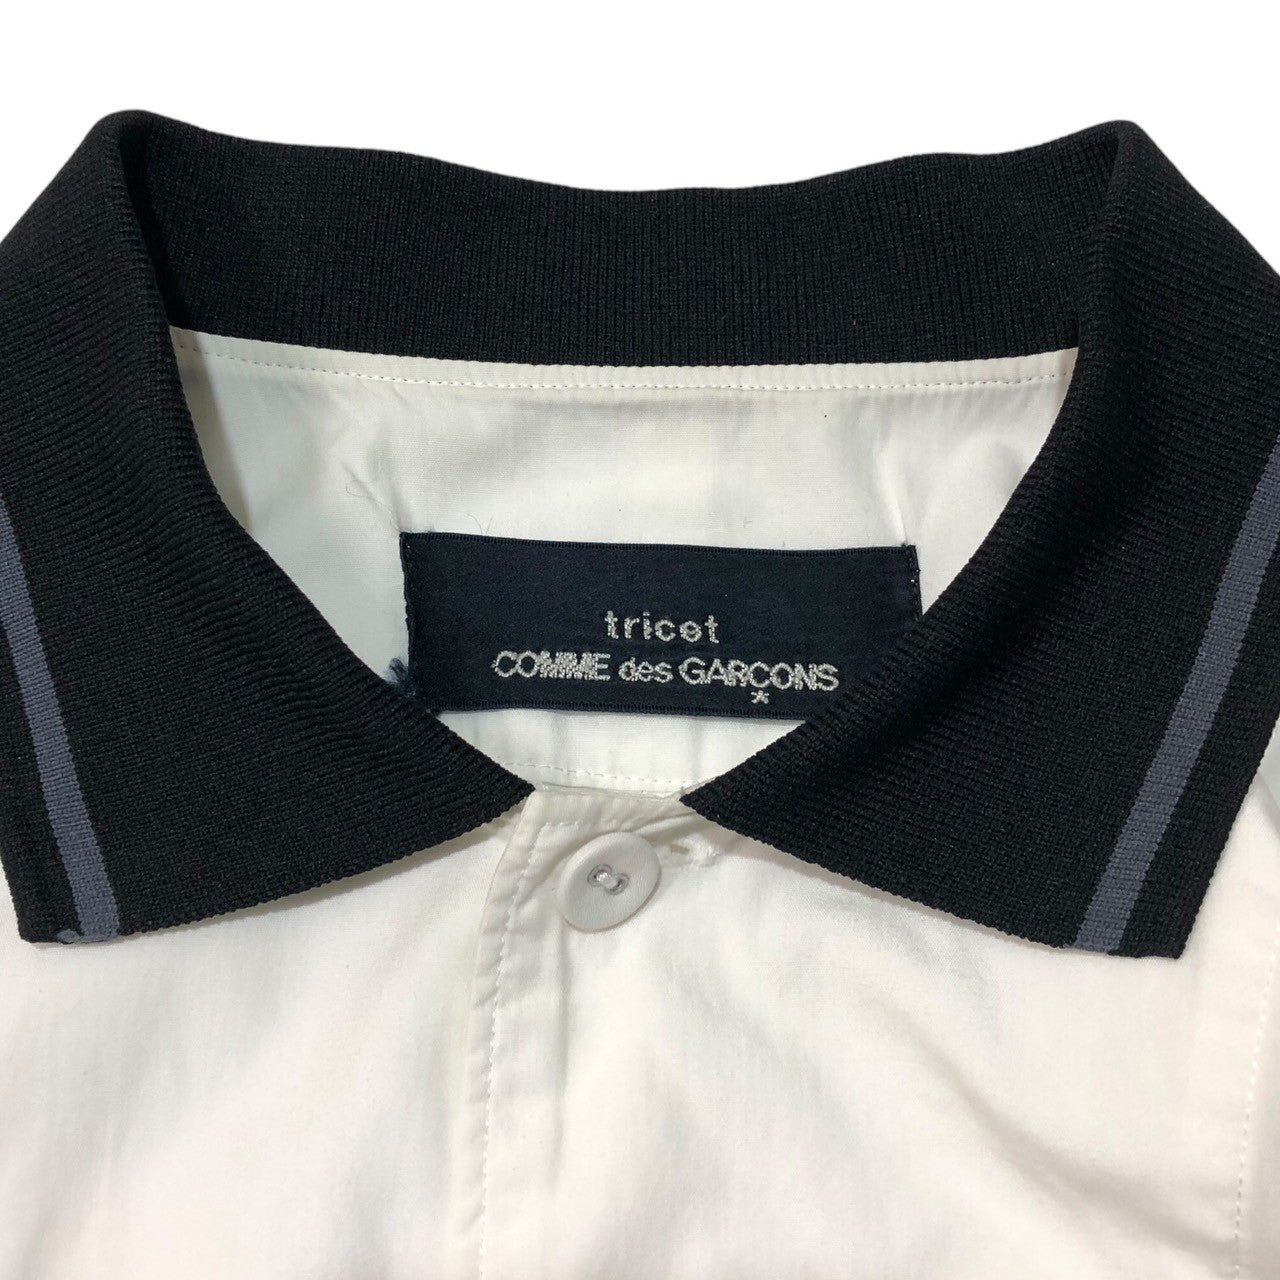 tricot COMME des GARCONS(トリココムデギャルソン) 90's Dolman sleeve shirt with switched collar 襟切り替えドルマンスリーブシャツ ホワイト